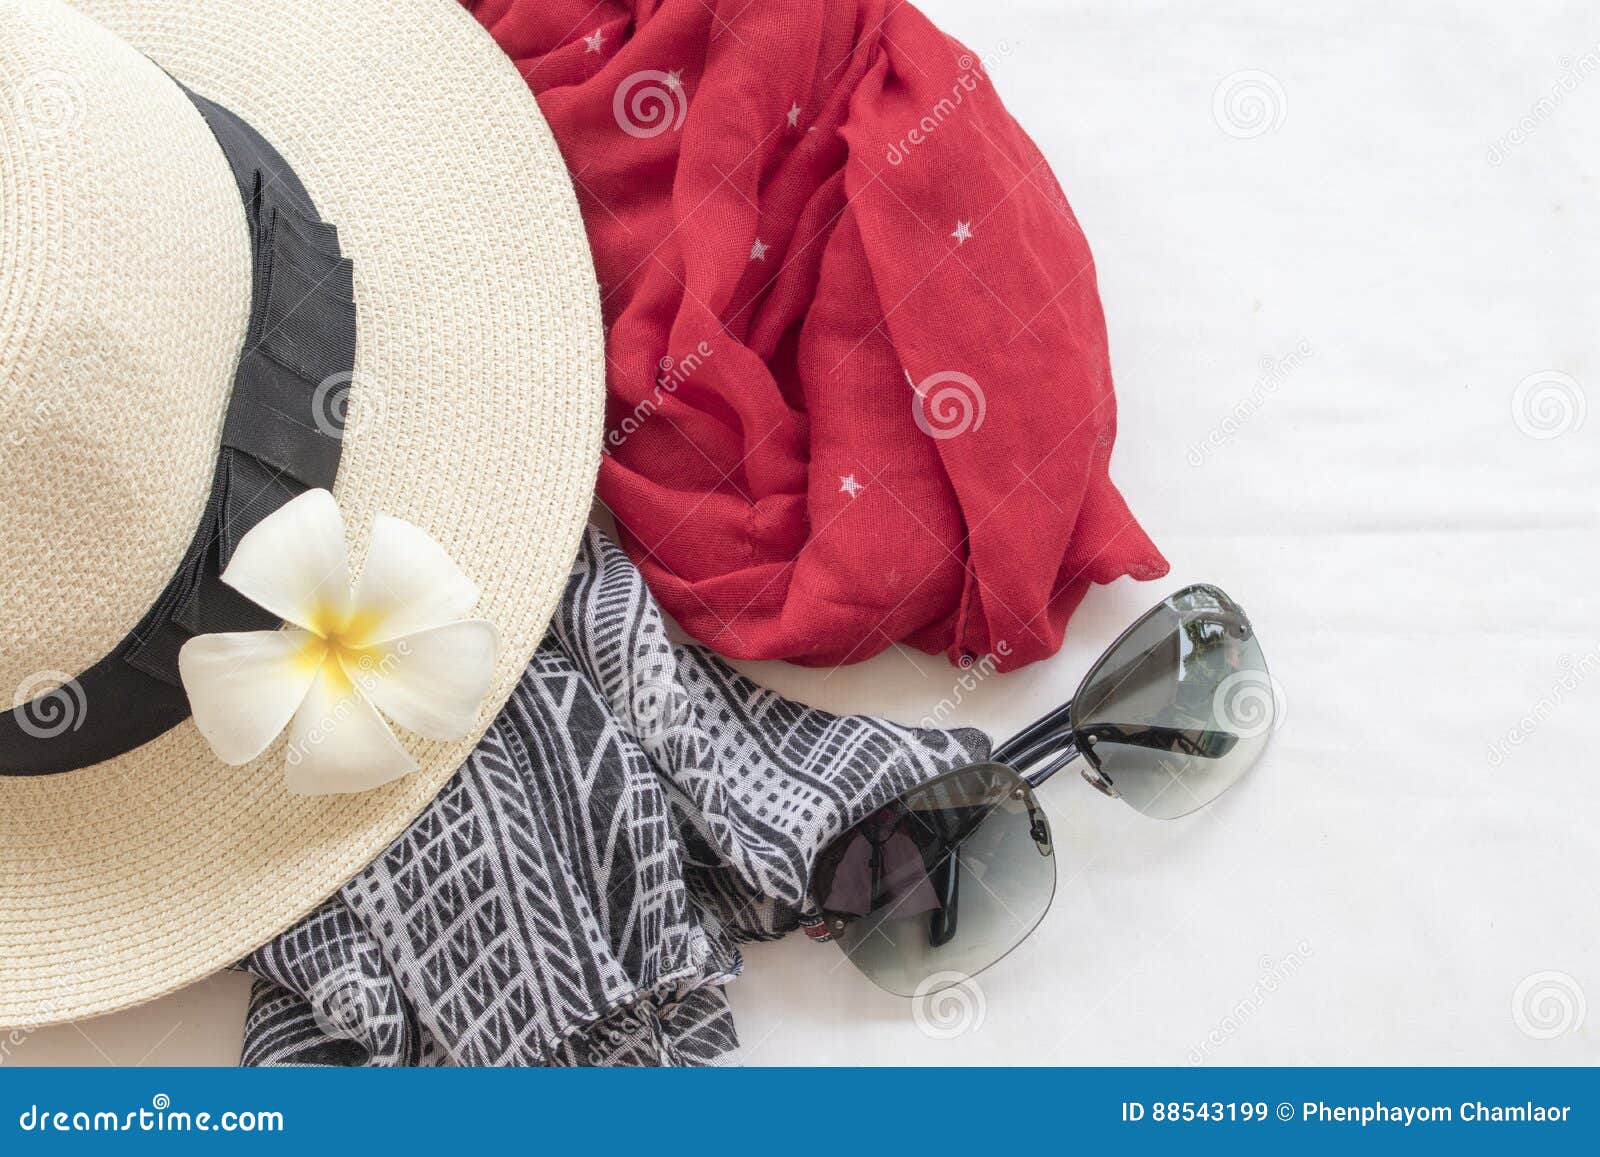 Background Fashion of Woman Accessories for Summer Stock Image - Image ...